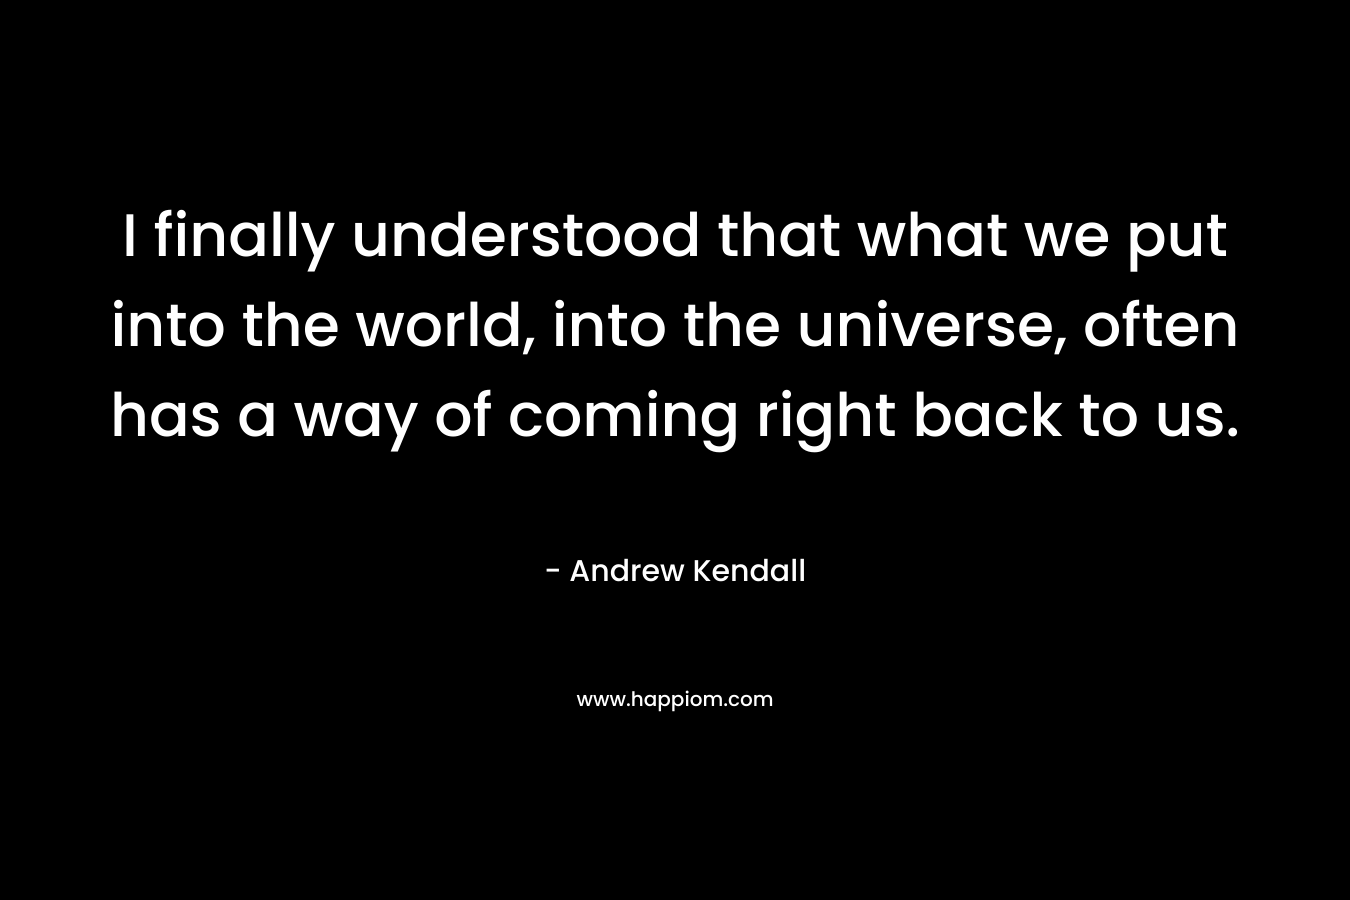 I finally understood that what we put into the world, into the universe, often has a way of coming right back to us.